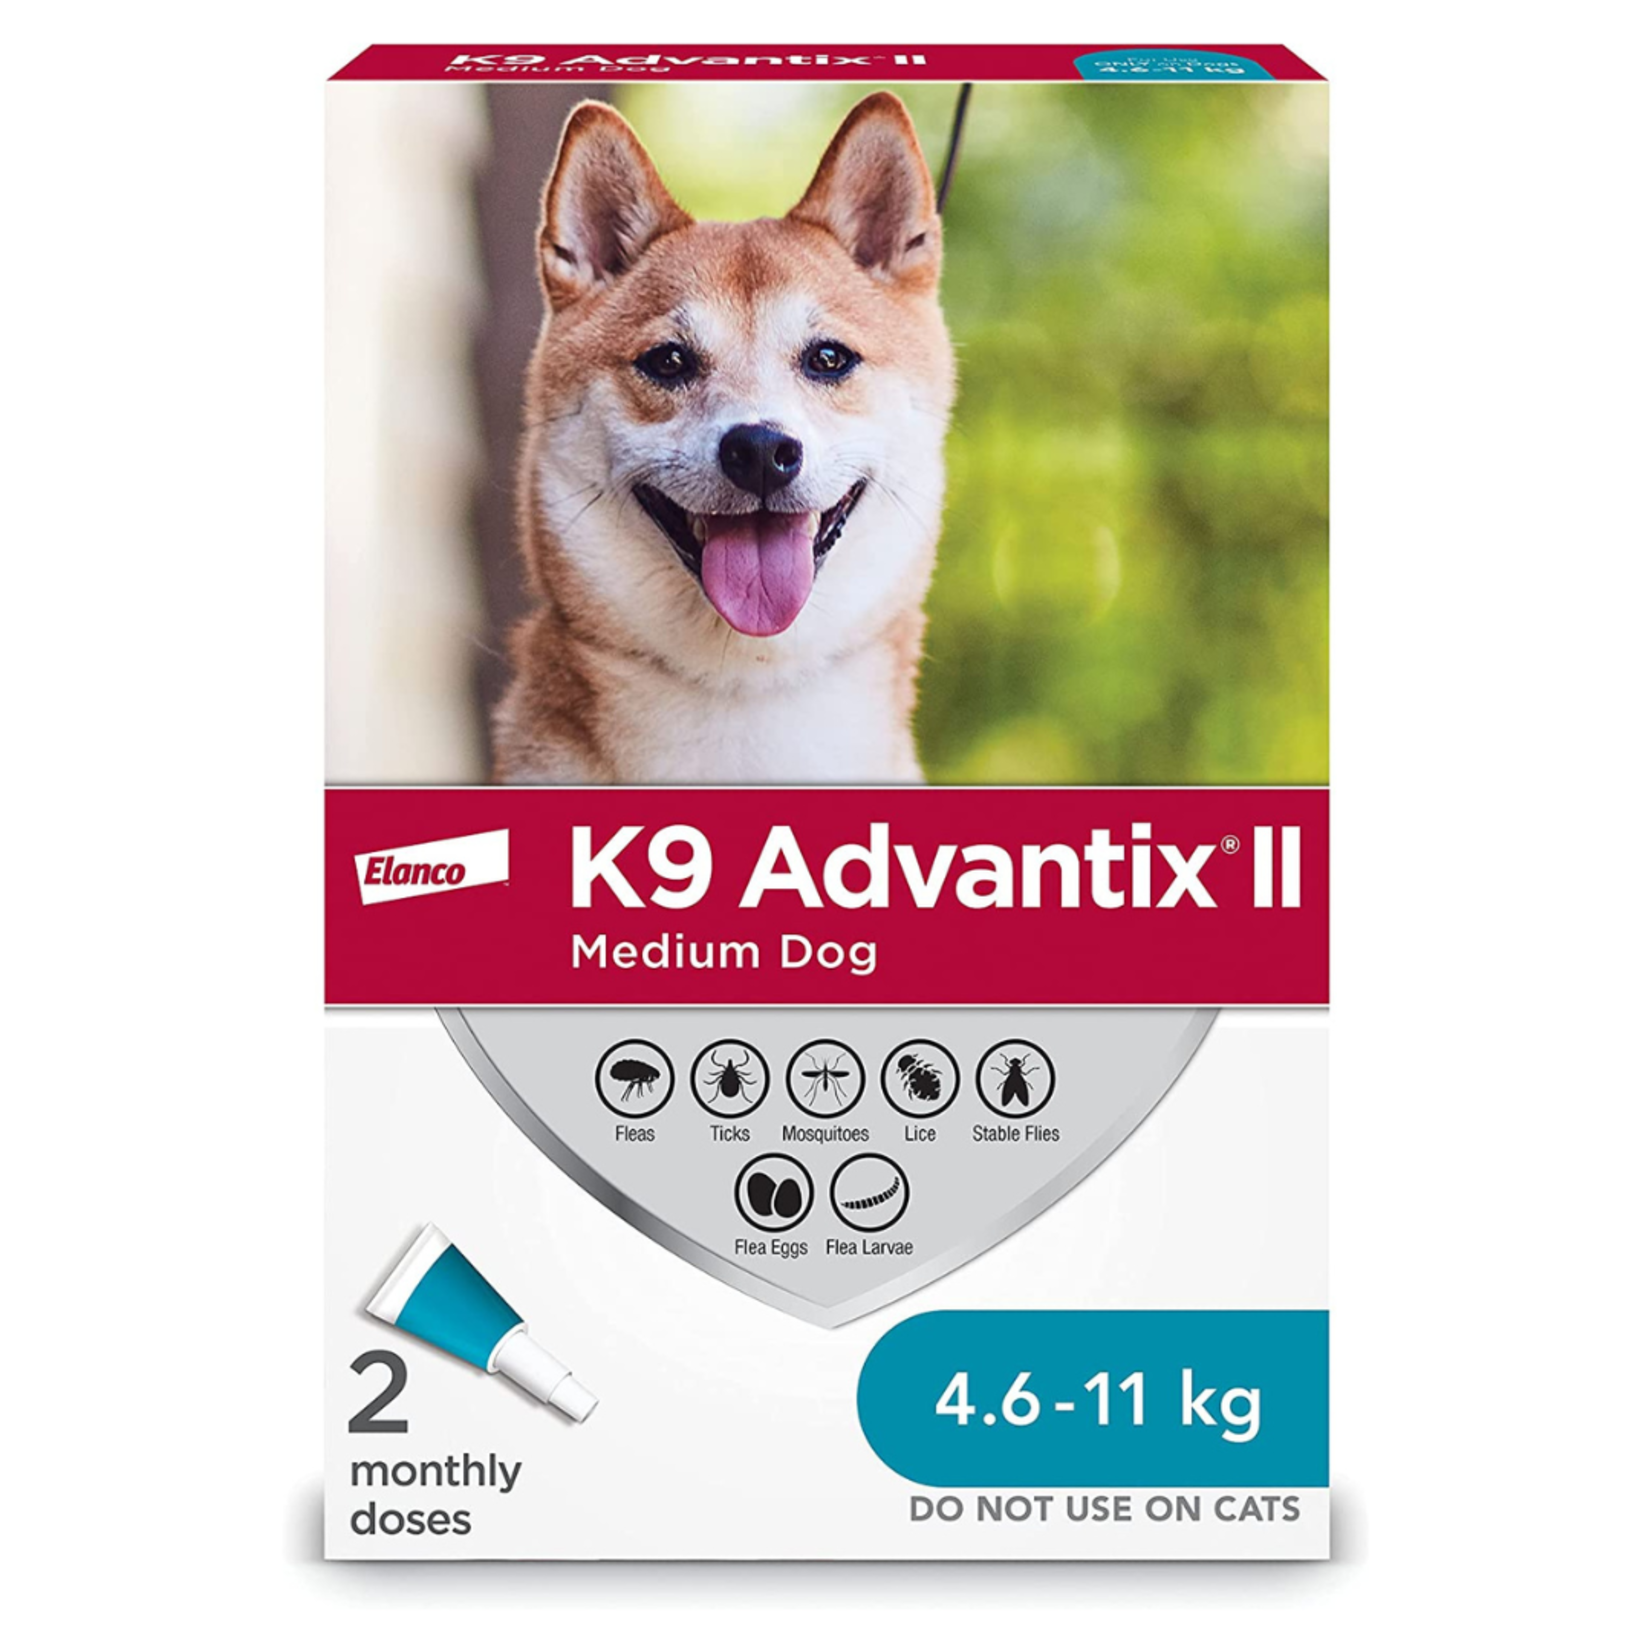 K9 Advantix II Dogs Complete protection Tick and Flea  for Medium dogs 4.6kg to 11 kg (2 dosage)